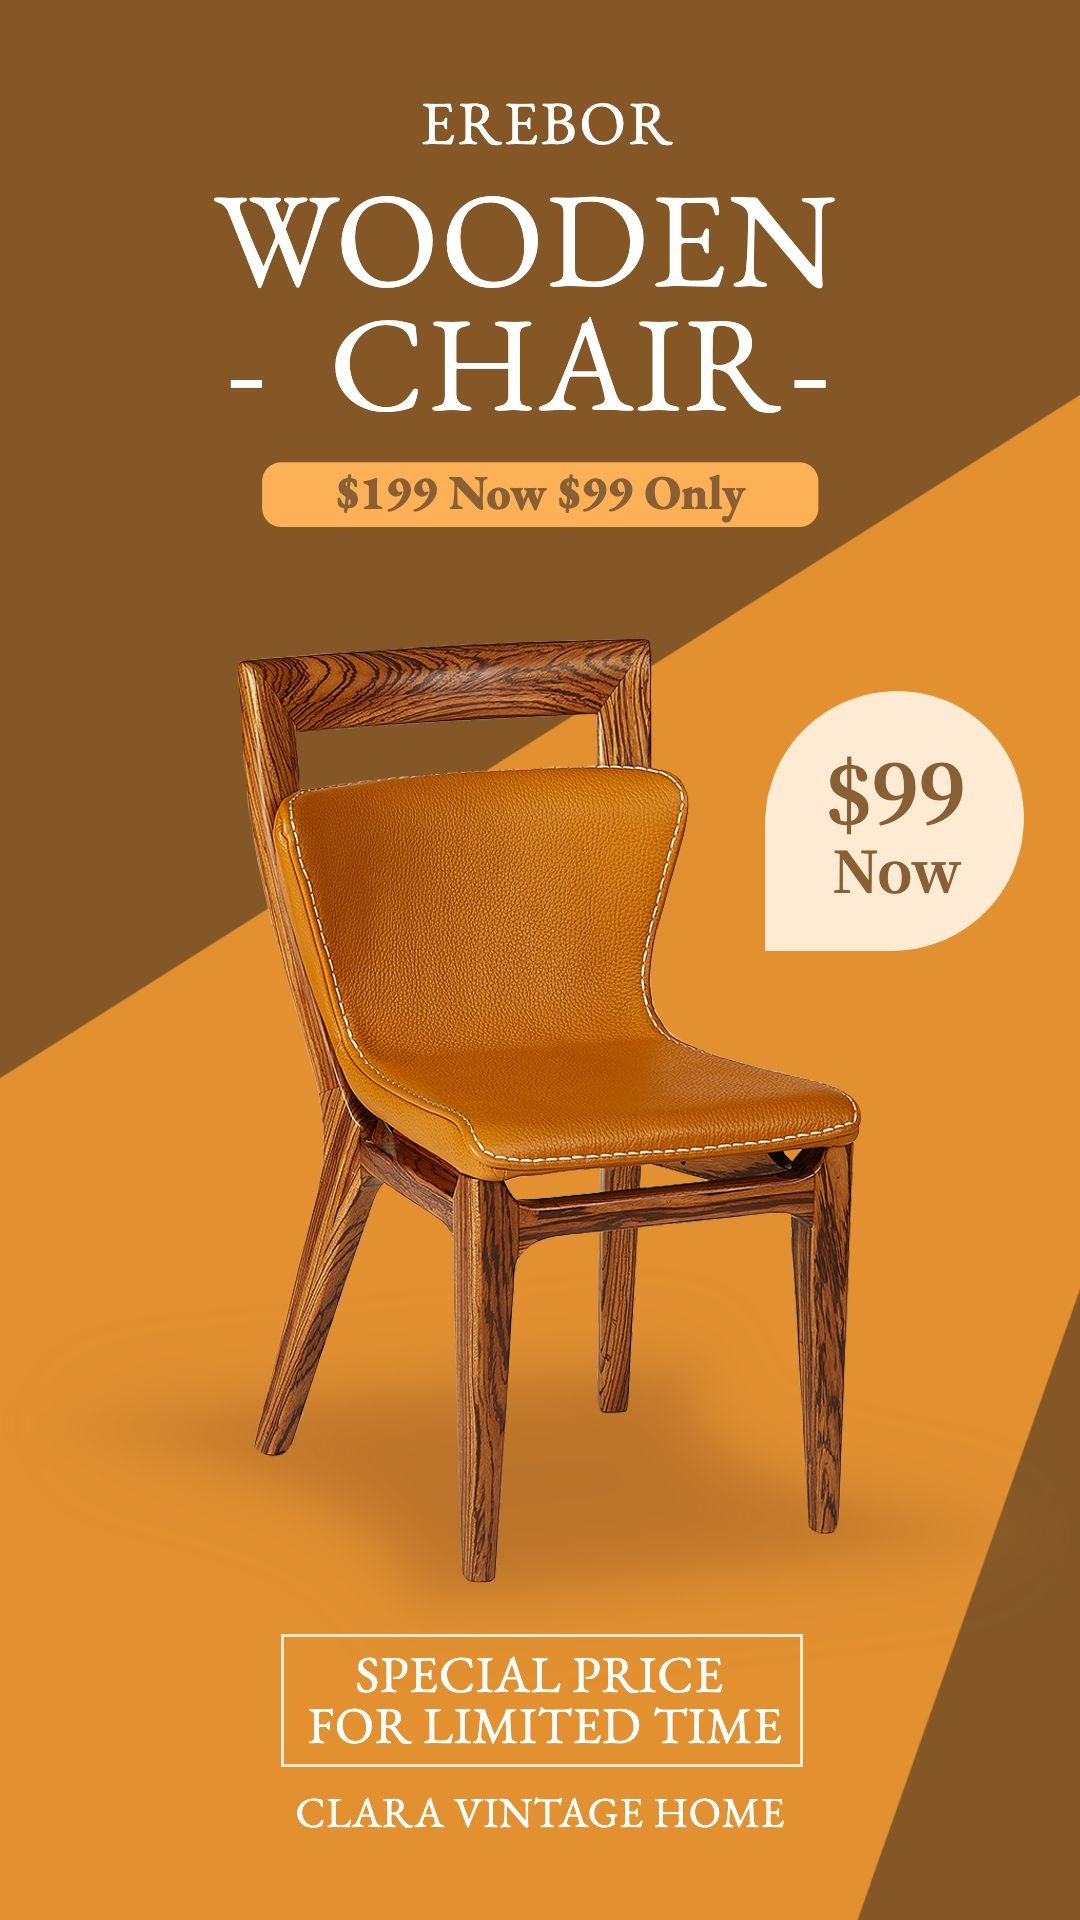 Wood Chair Display Simple Furniture Sale Promo Ecommerce Story预览效果